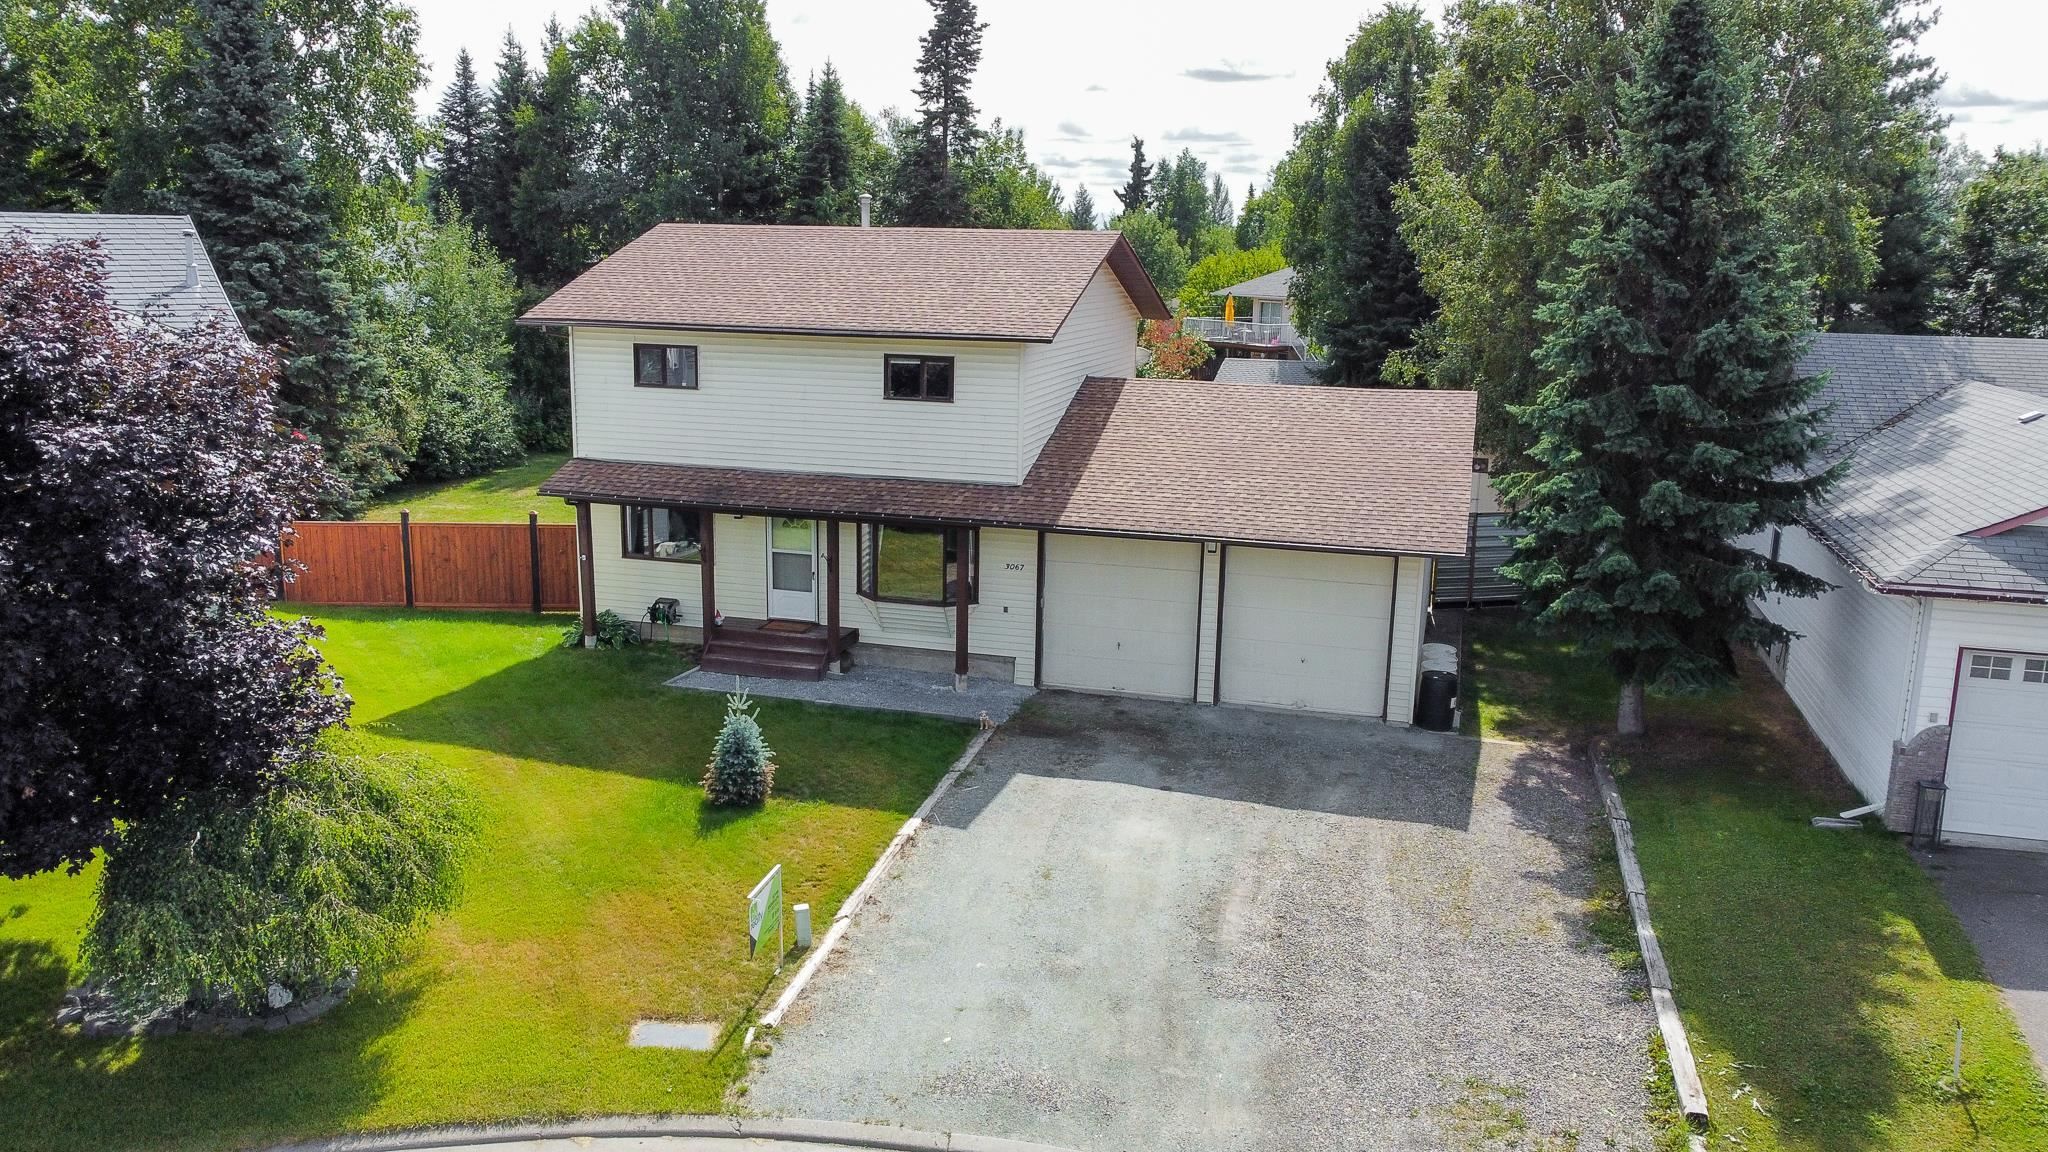 Main Photo: 3067 WHITESAIL Place in Prince George: Valleyview House for sale (PG City North (Zone 73))  : MLS®# R2609899